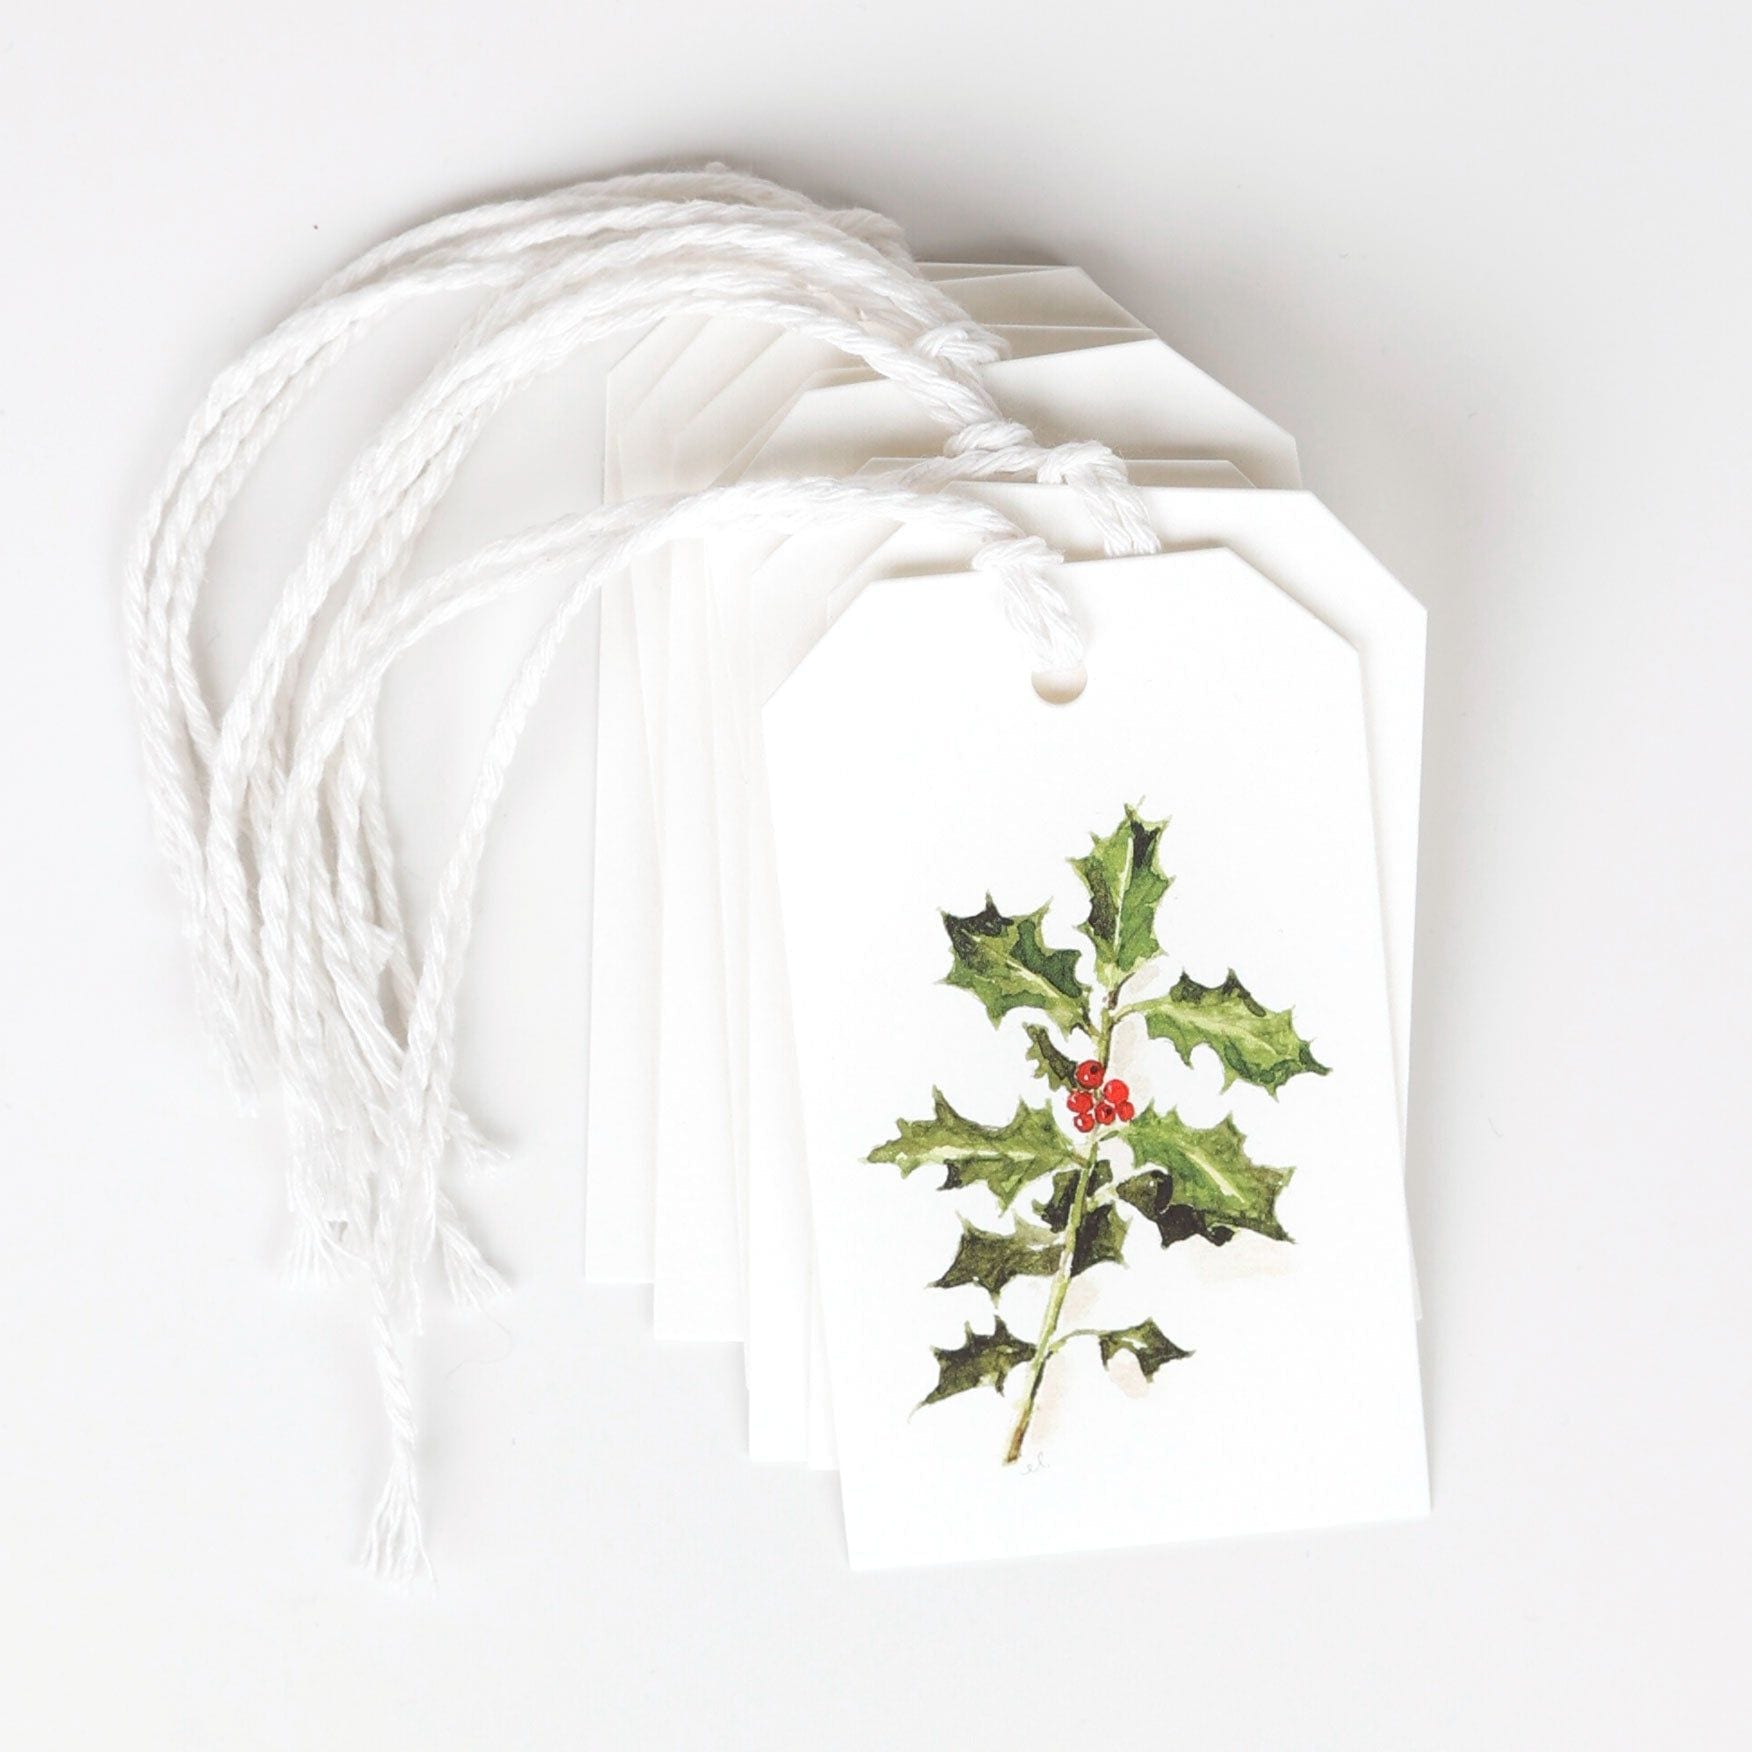 Set of 10 Botanical Holiday Gift Tags – Little Truths Studio